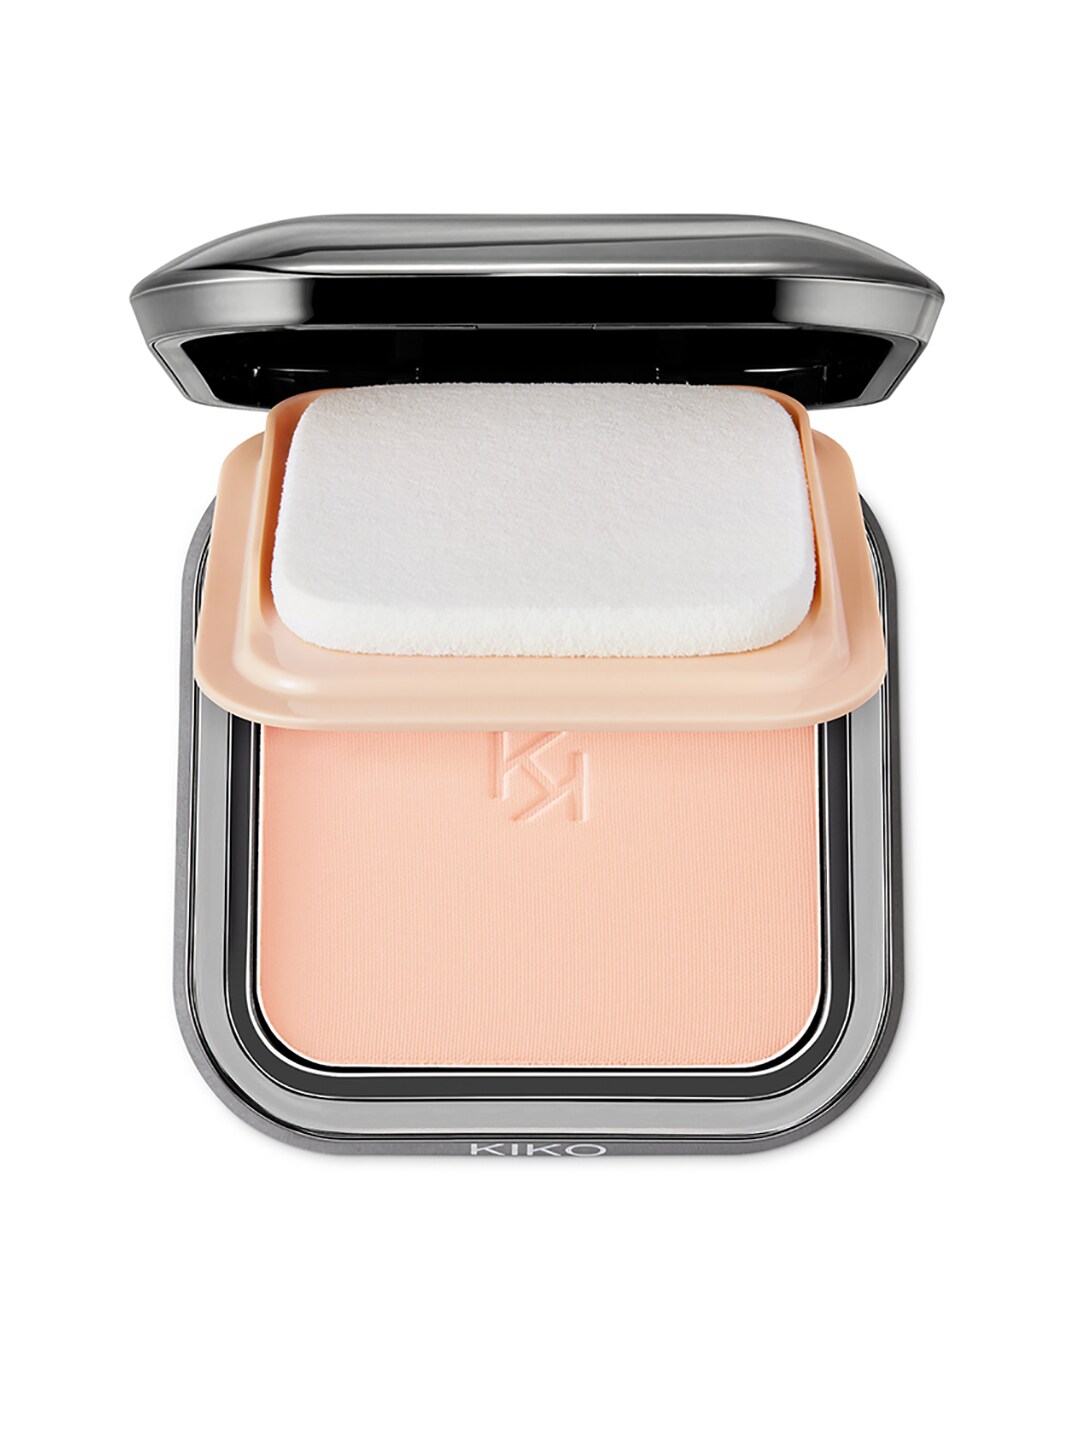 KIKO MILANO Weightless Perfection Wet and Dry Powder Foundation CR20 Price in India